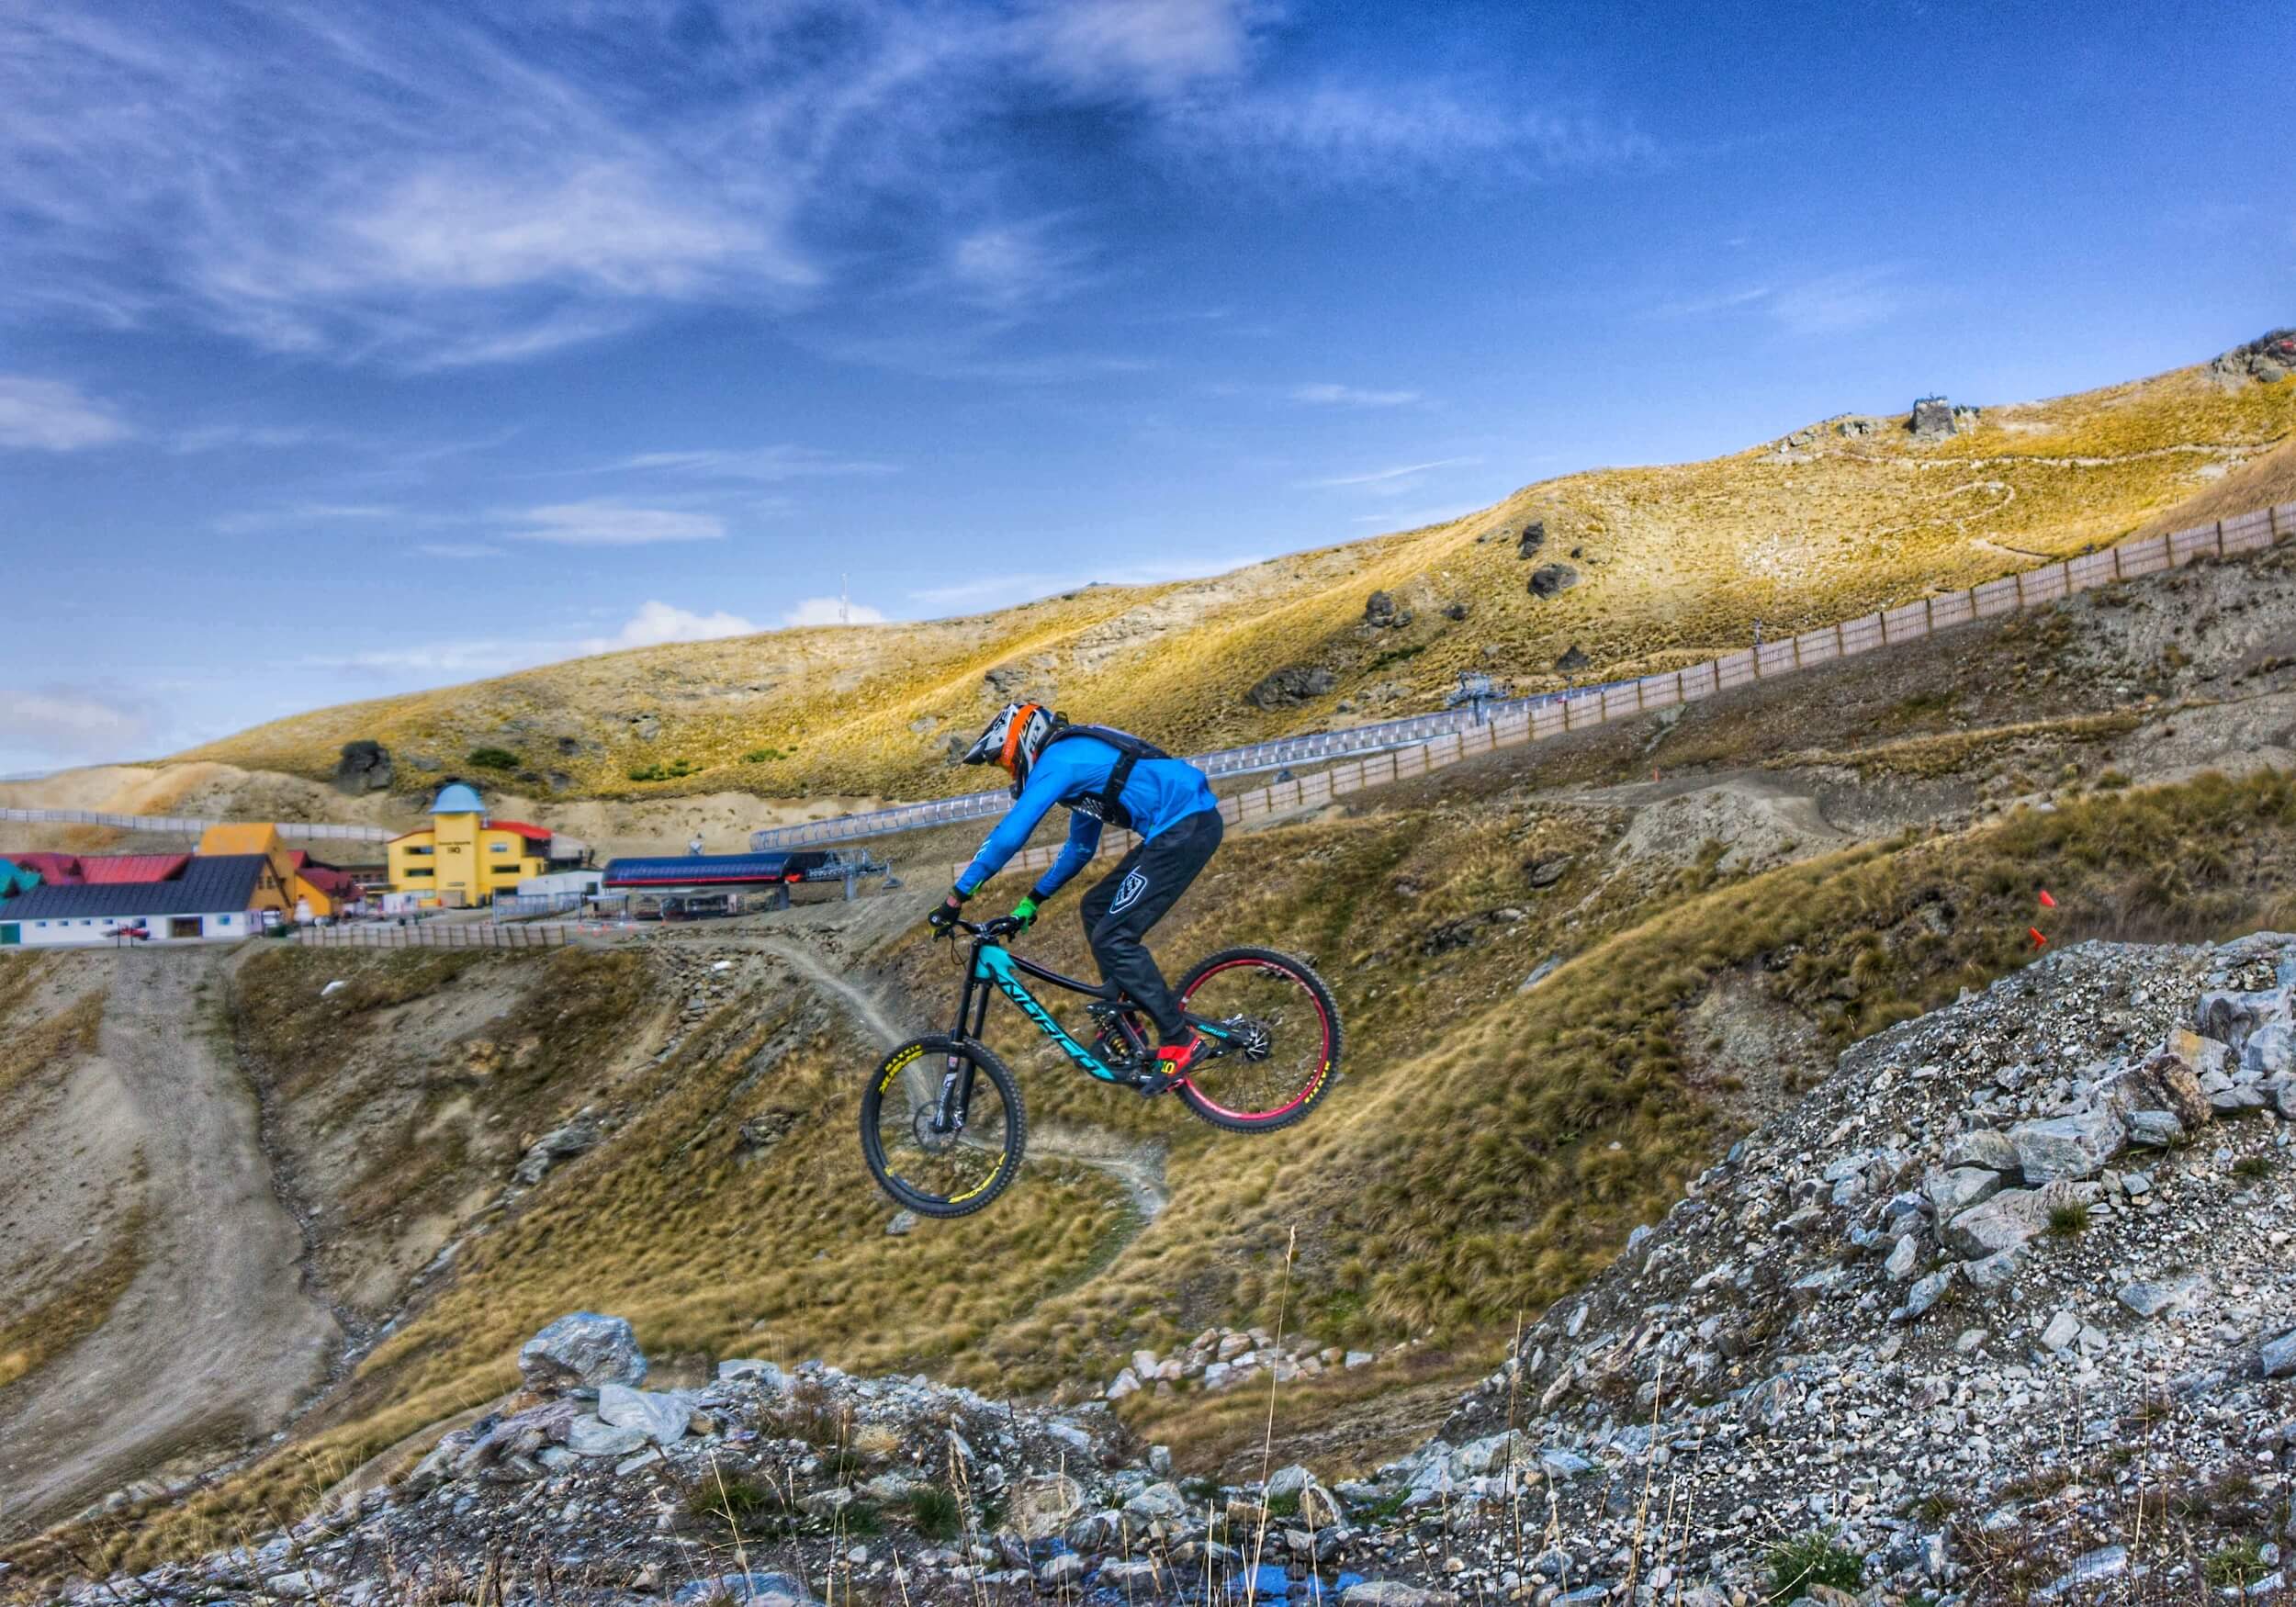 neus vereist meloen Cardrona Mountain Biking - Awesome Riding at the Cardrona Bike Park, New  Zealand. — The Snow Chasers | travel tips for skiers & snowboarders